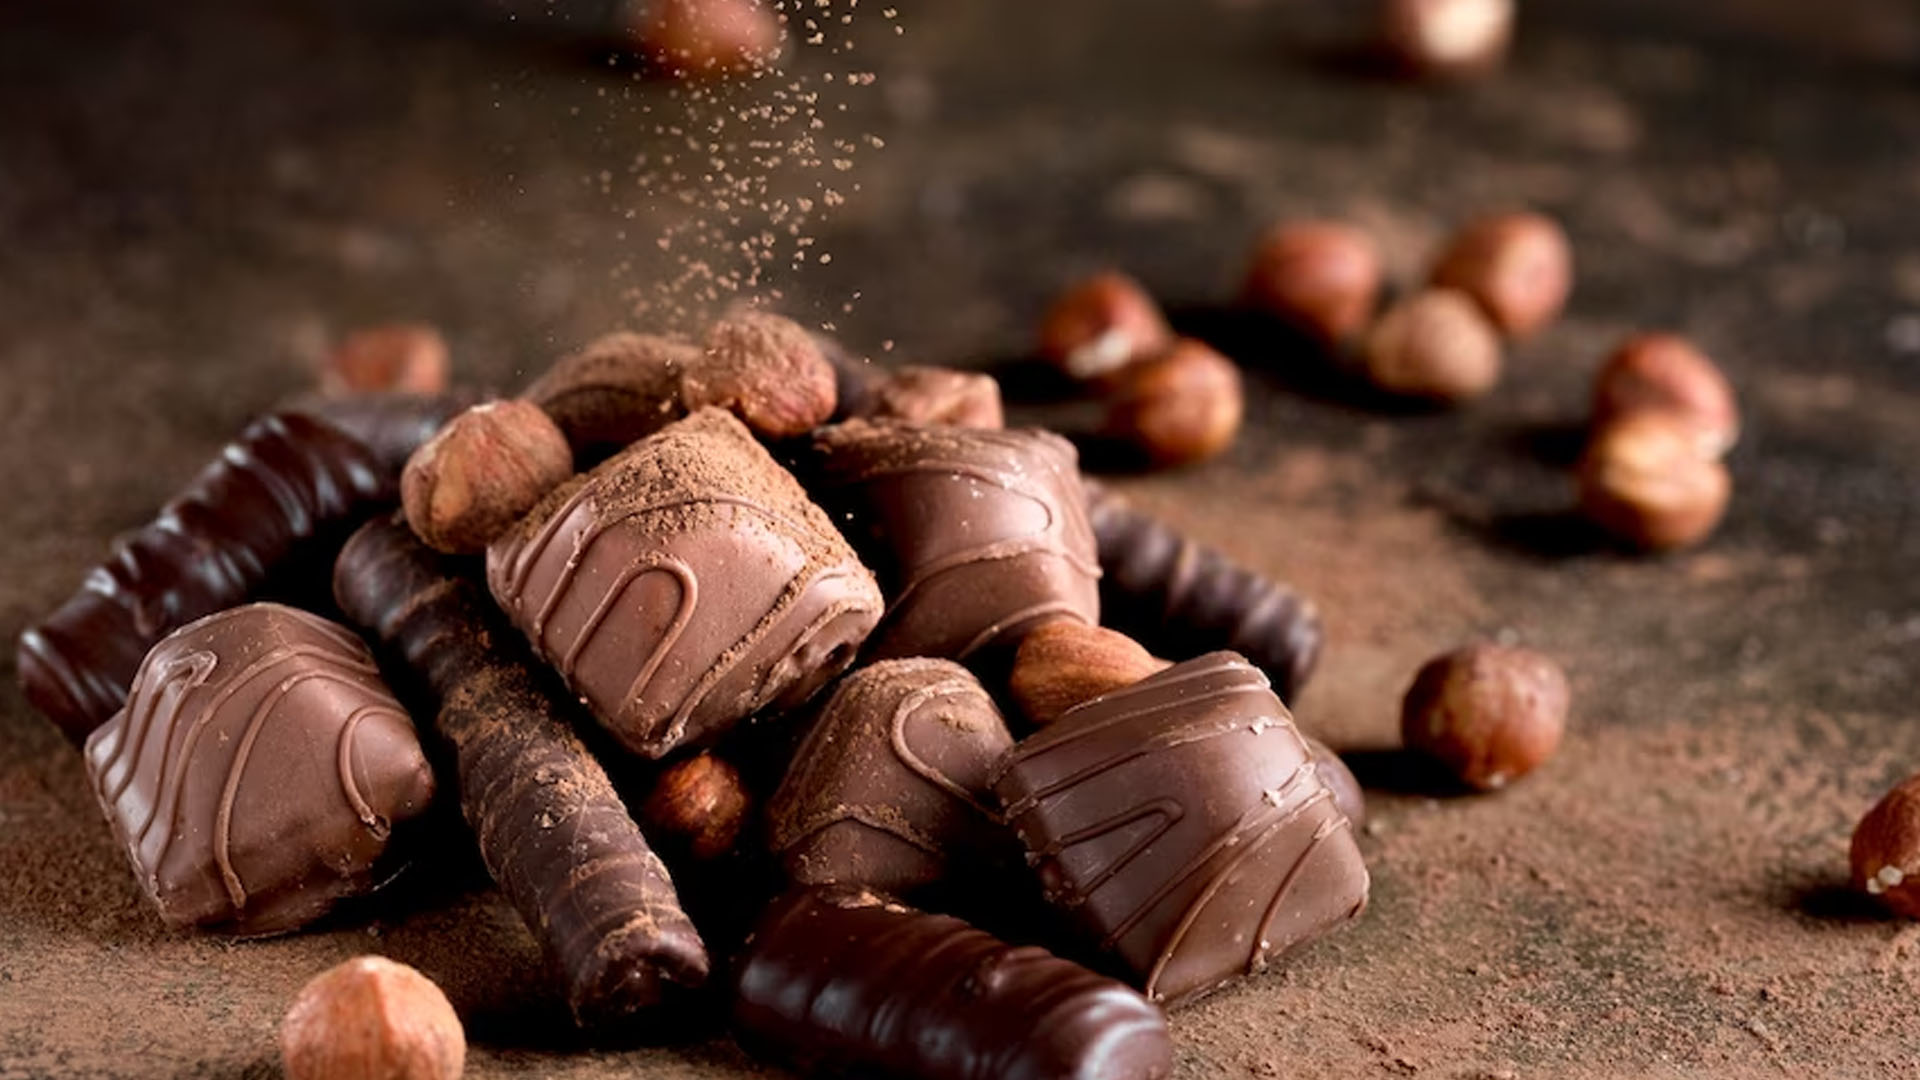 What Are Some Health Benefits Of Chocolate?